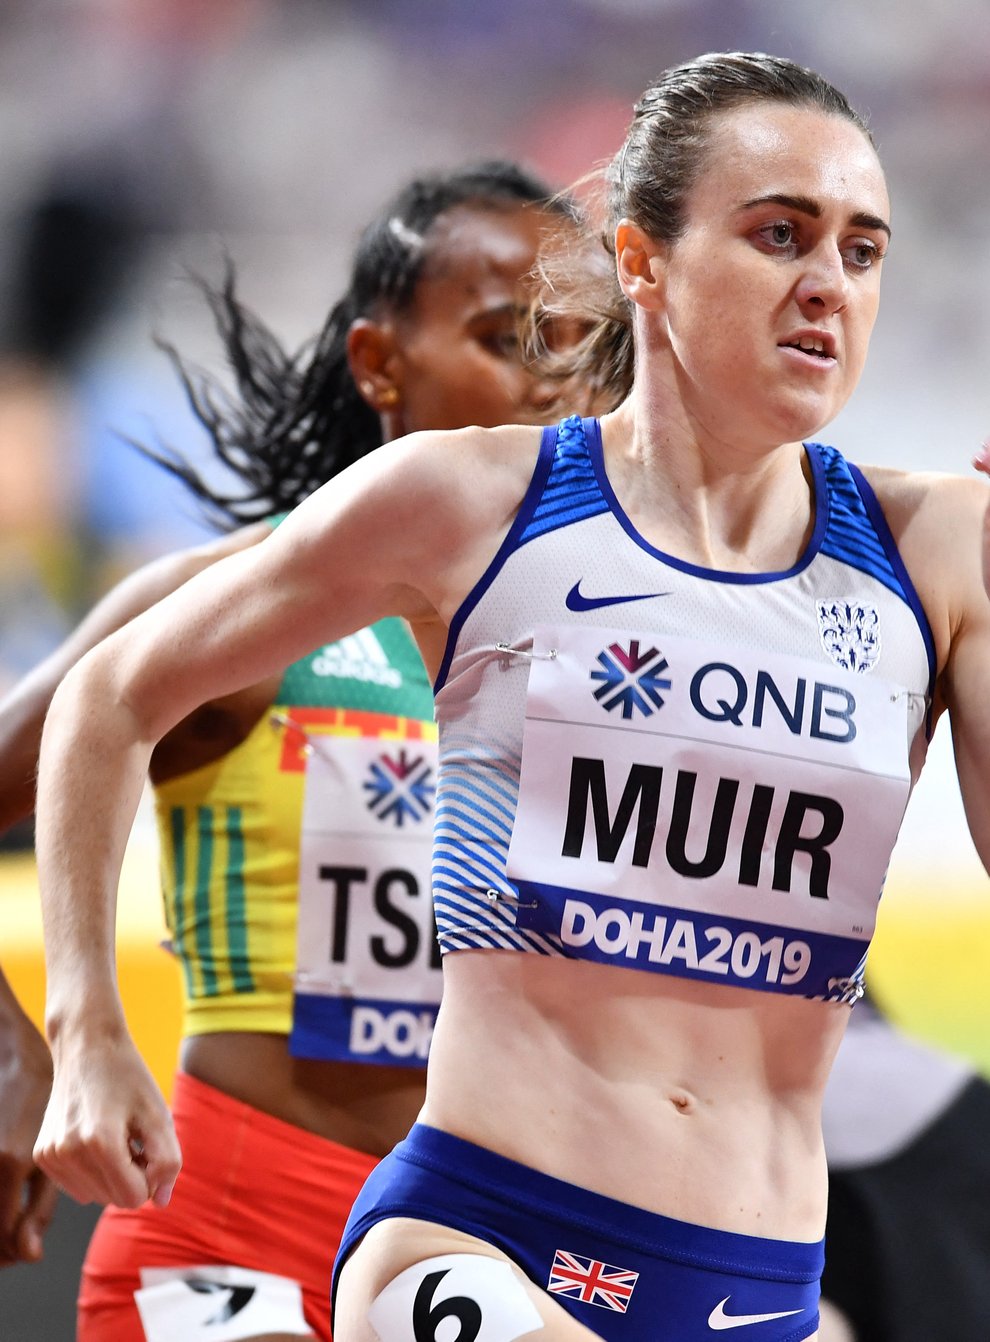 Laura Muir to head to Bydgoszcz for her next race